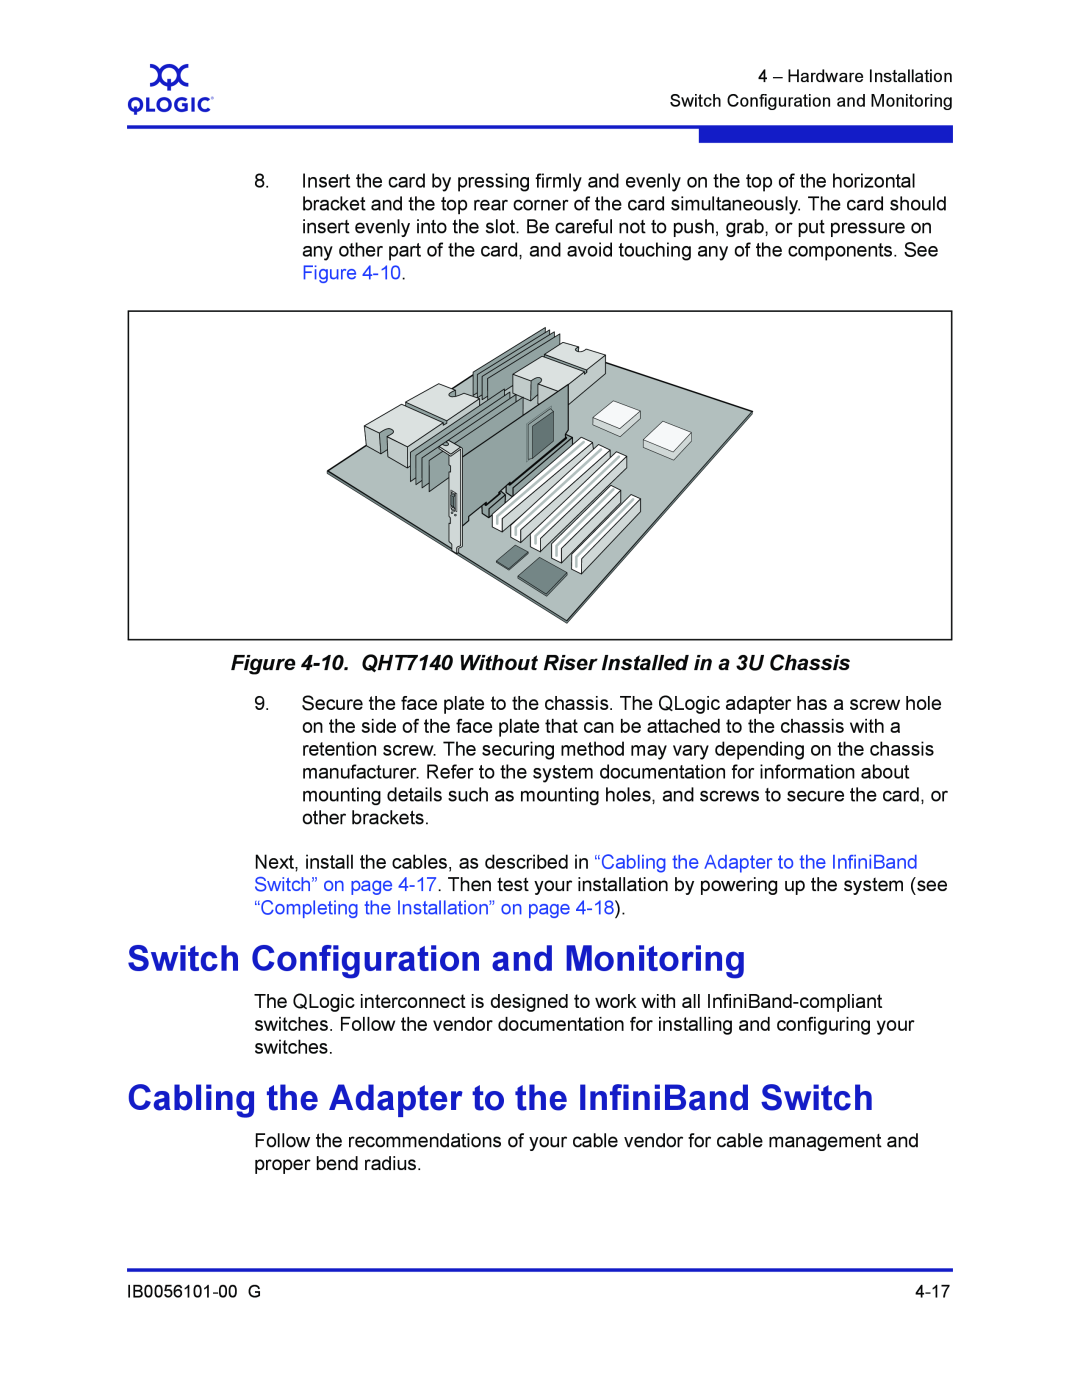 Q-Logic IB0056101-00 G manual Switch Configuration and Monitoring, Cabling the Adapter to the InfiniBand Switch 